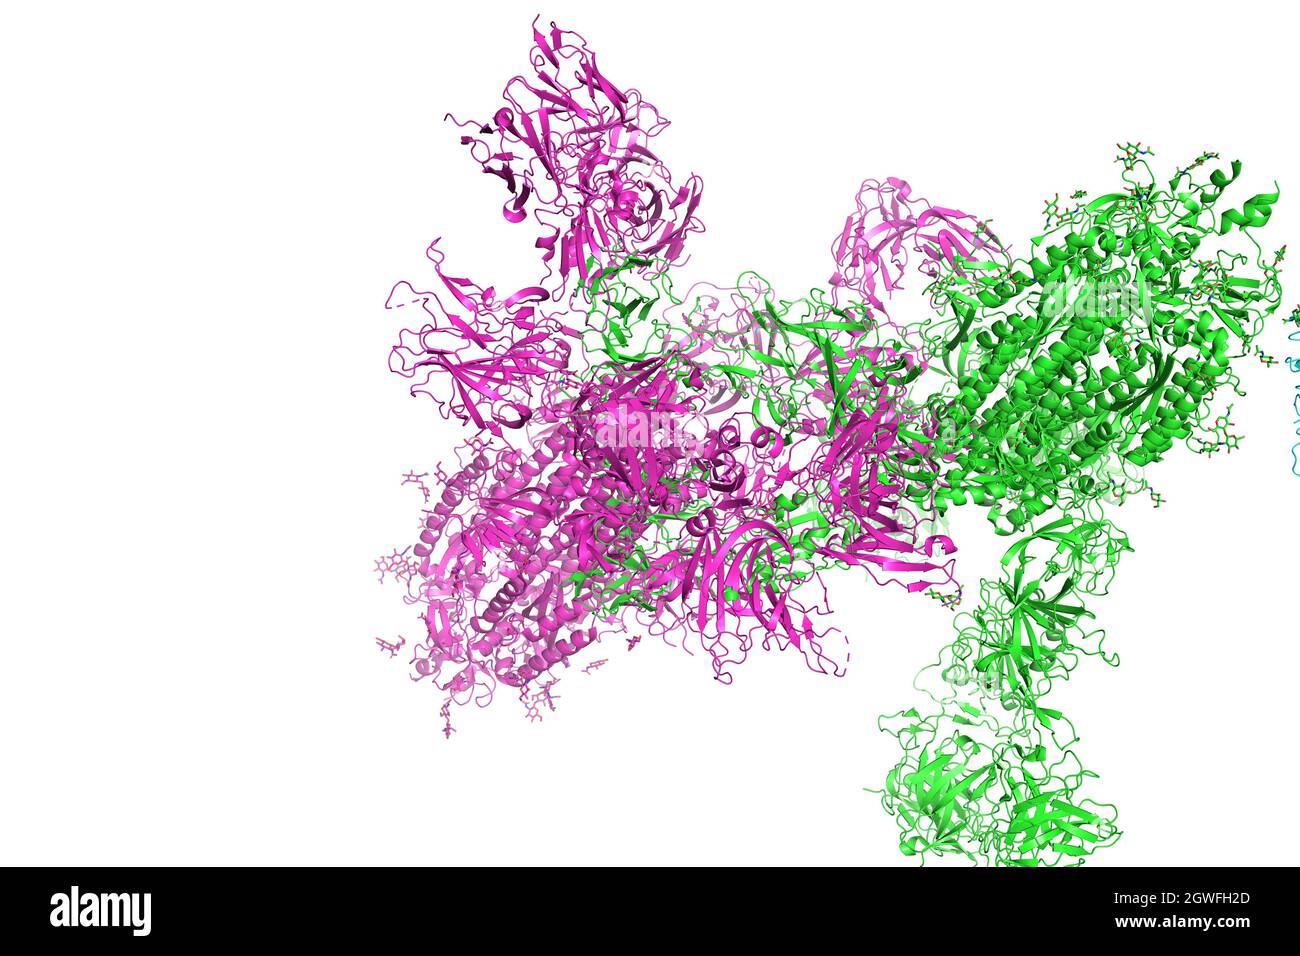 SARS-CoV-2 Spike Glycoprotein. The structure of the complex with protein S, which forms the 'crown' of the coronavirus, 3d rendering. Stock Photo